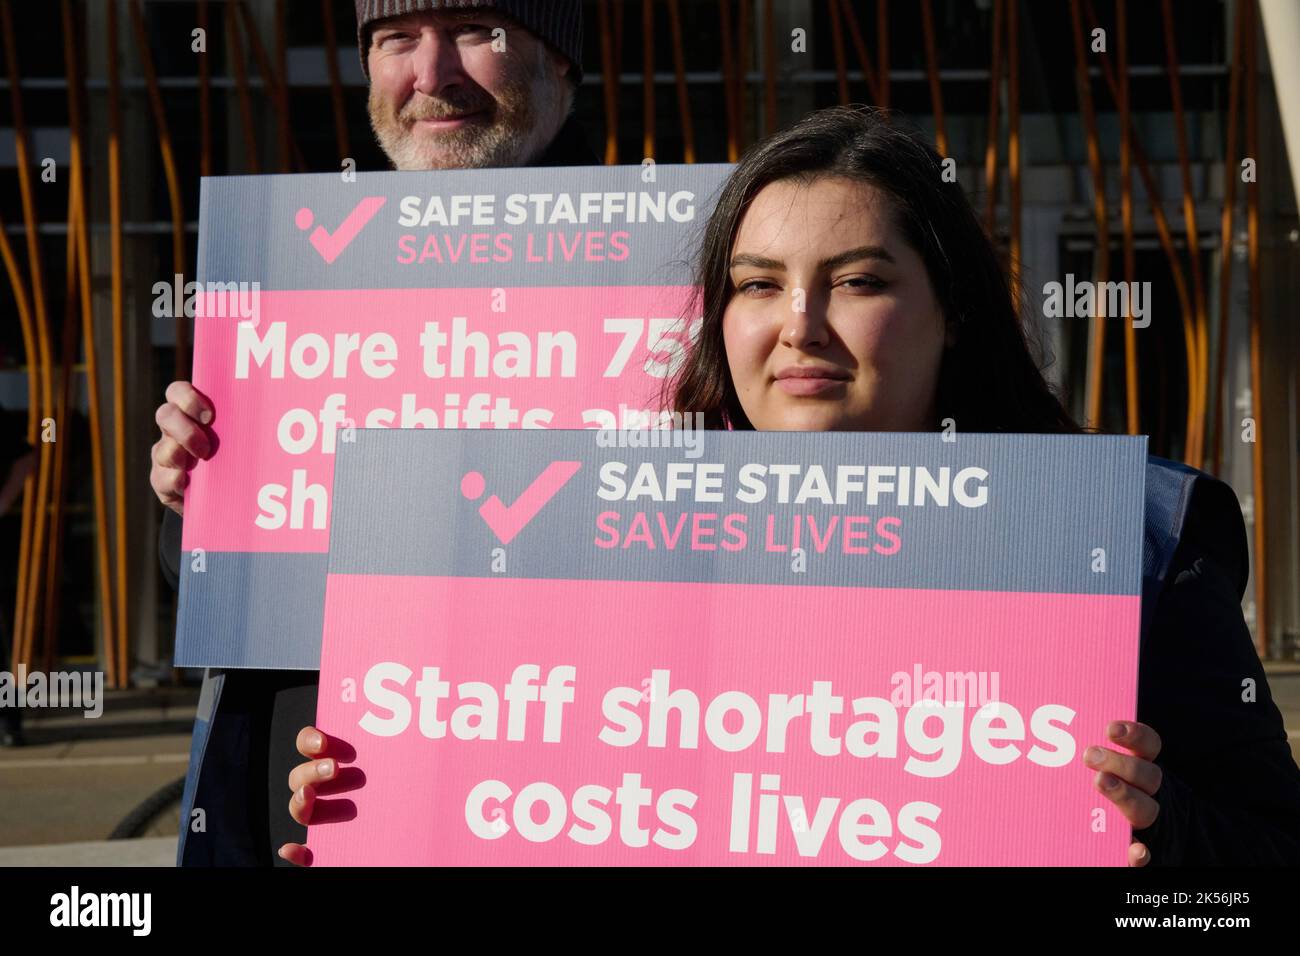 Edinburgh Scotland, UK 06 October 2022. The Royal College of Nursing Scotland members gather outside Scottish Parliament to draw attention to staff shortages and pay issues. credit sst/alamy live news Stock Photo